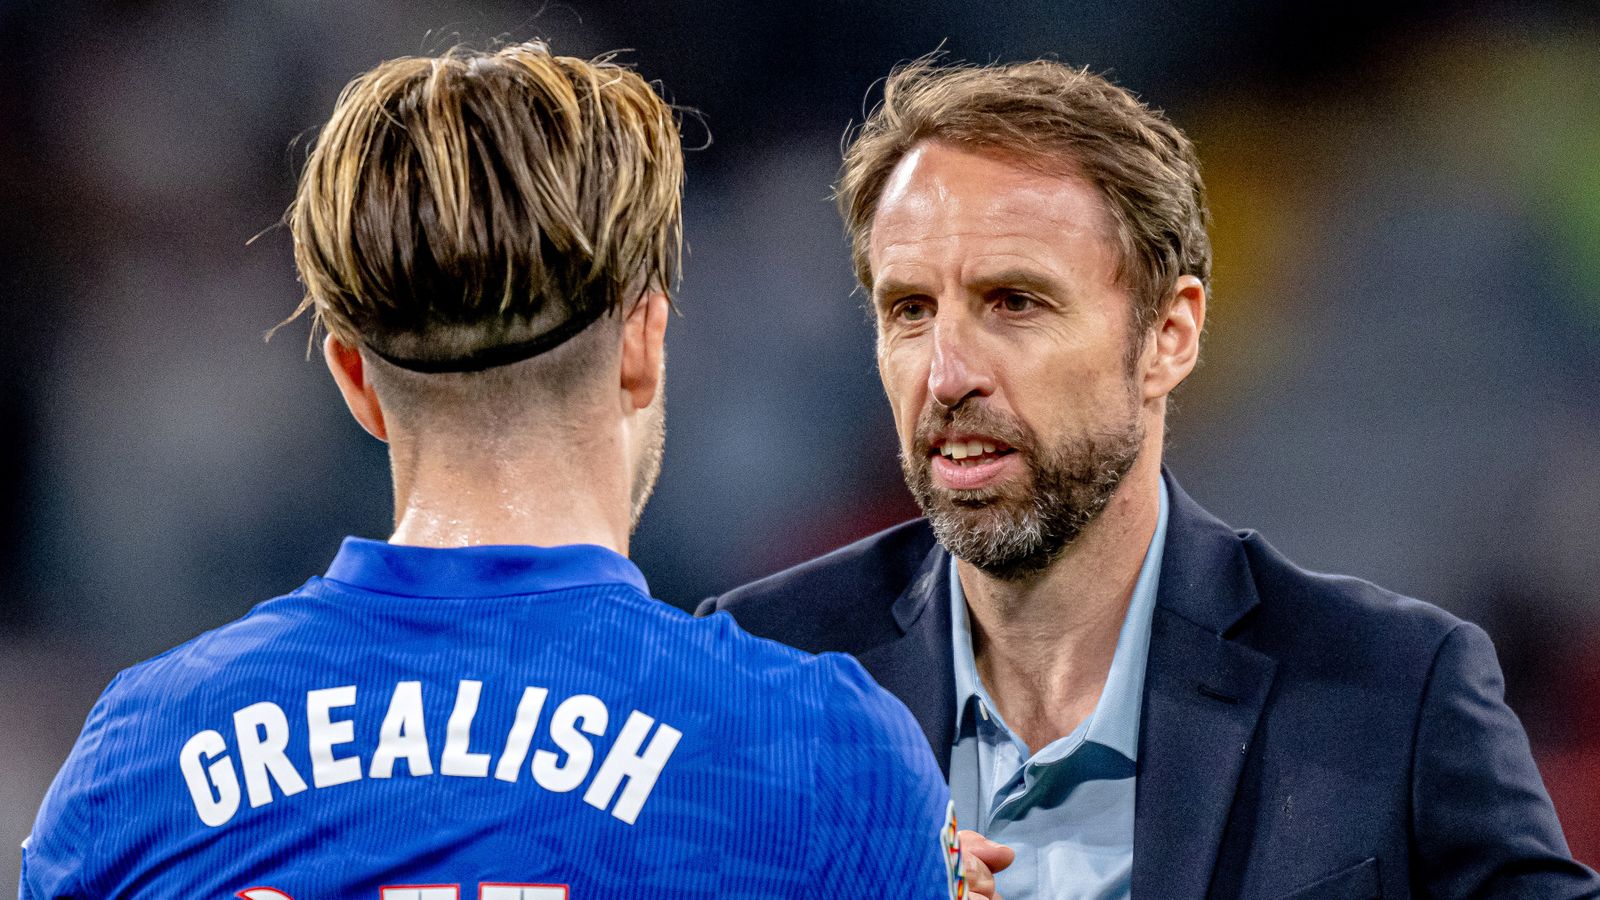 Gareth Southgate hits back at England critics after side struggle to create against Hungary and Germany